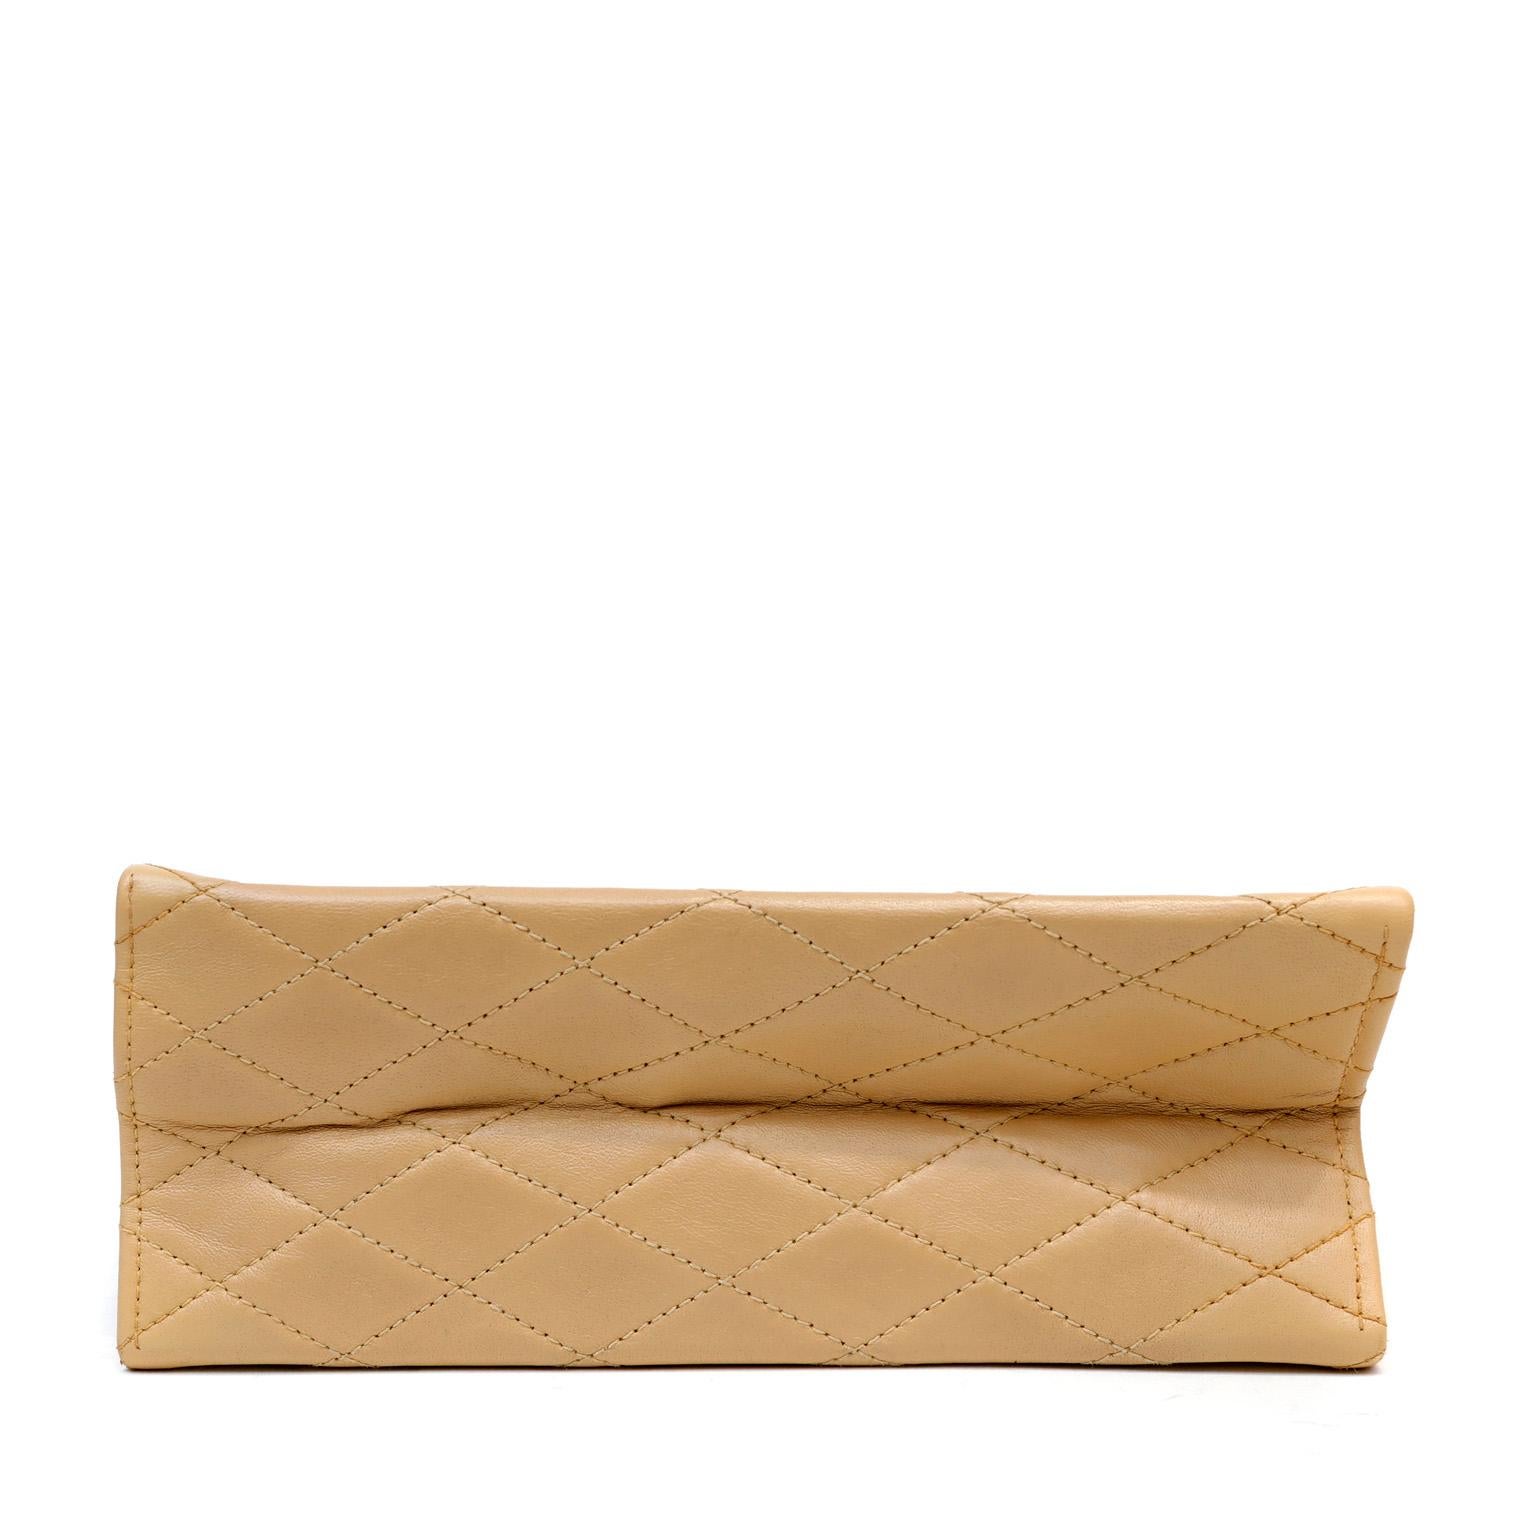 Chanel Vintage Beige Leather Envelope Flap Bag In Good Condition For Sale In Palm Beach, FL